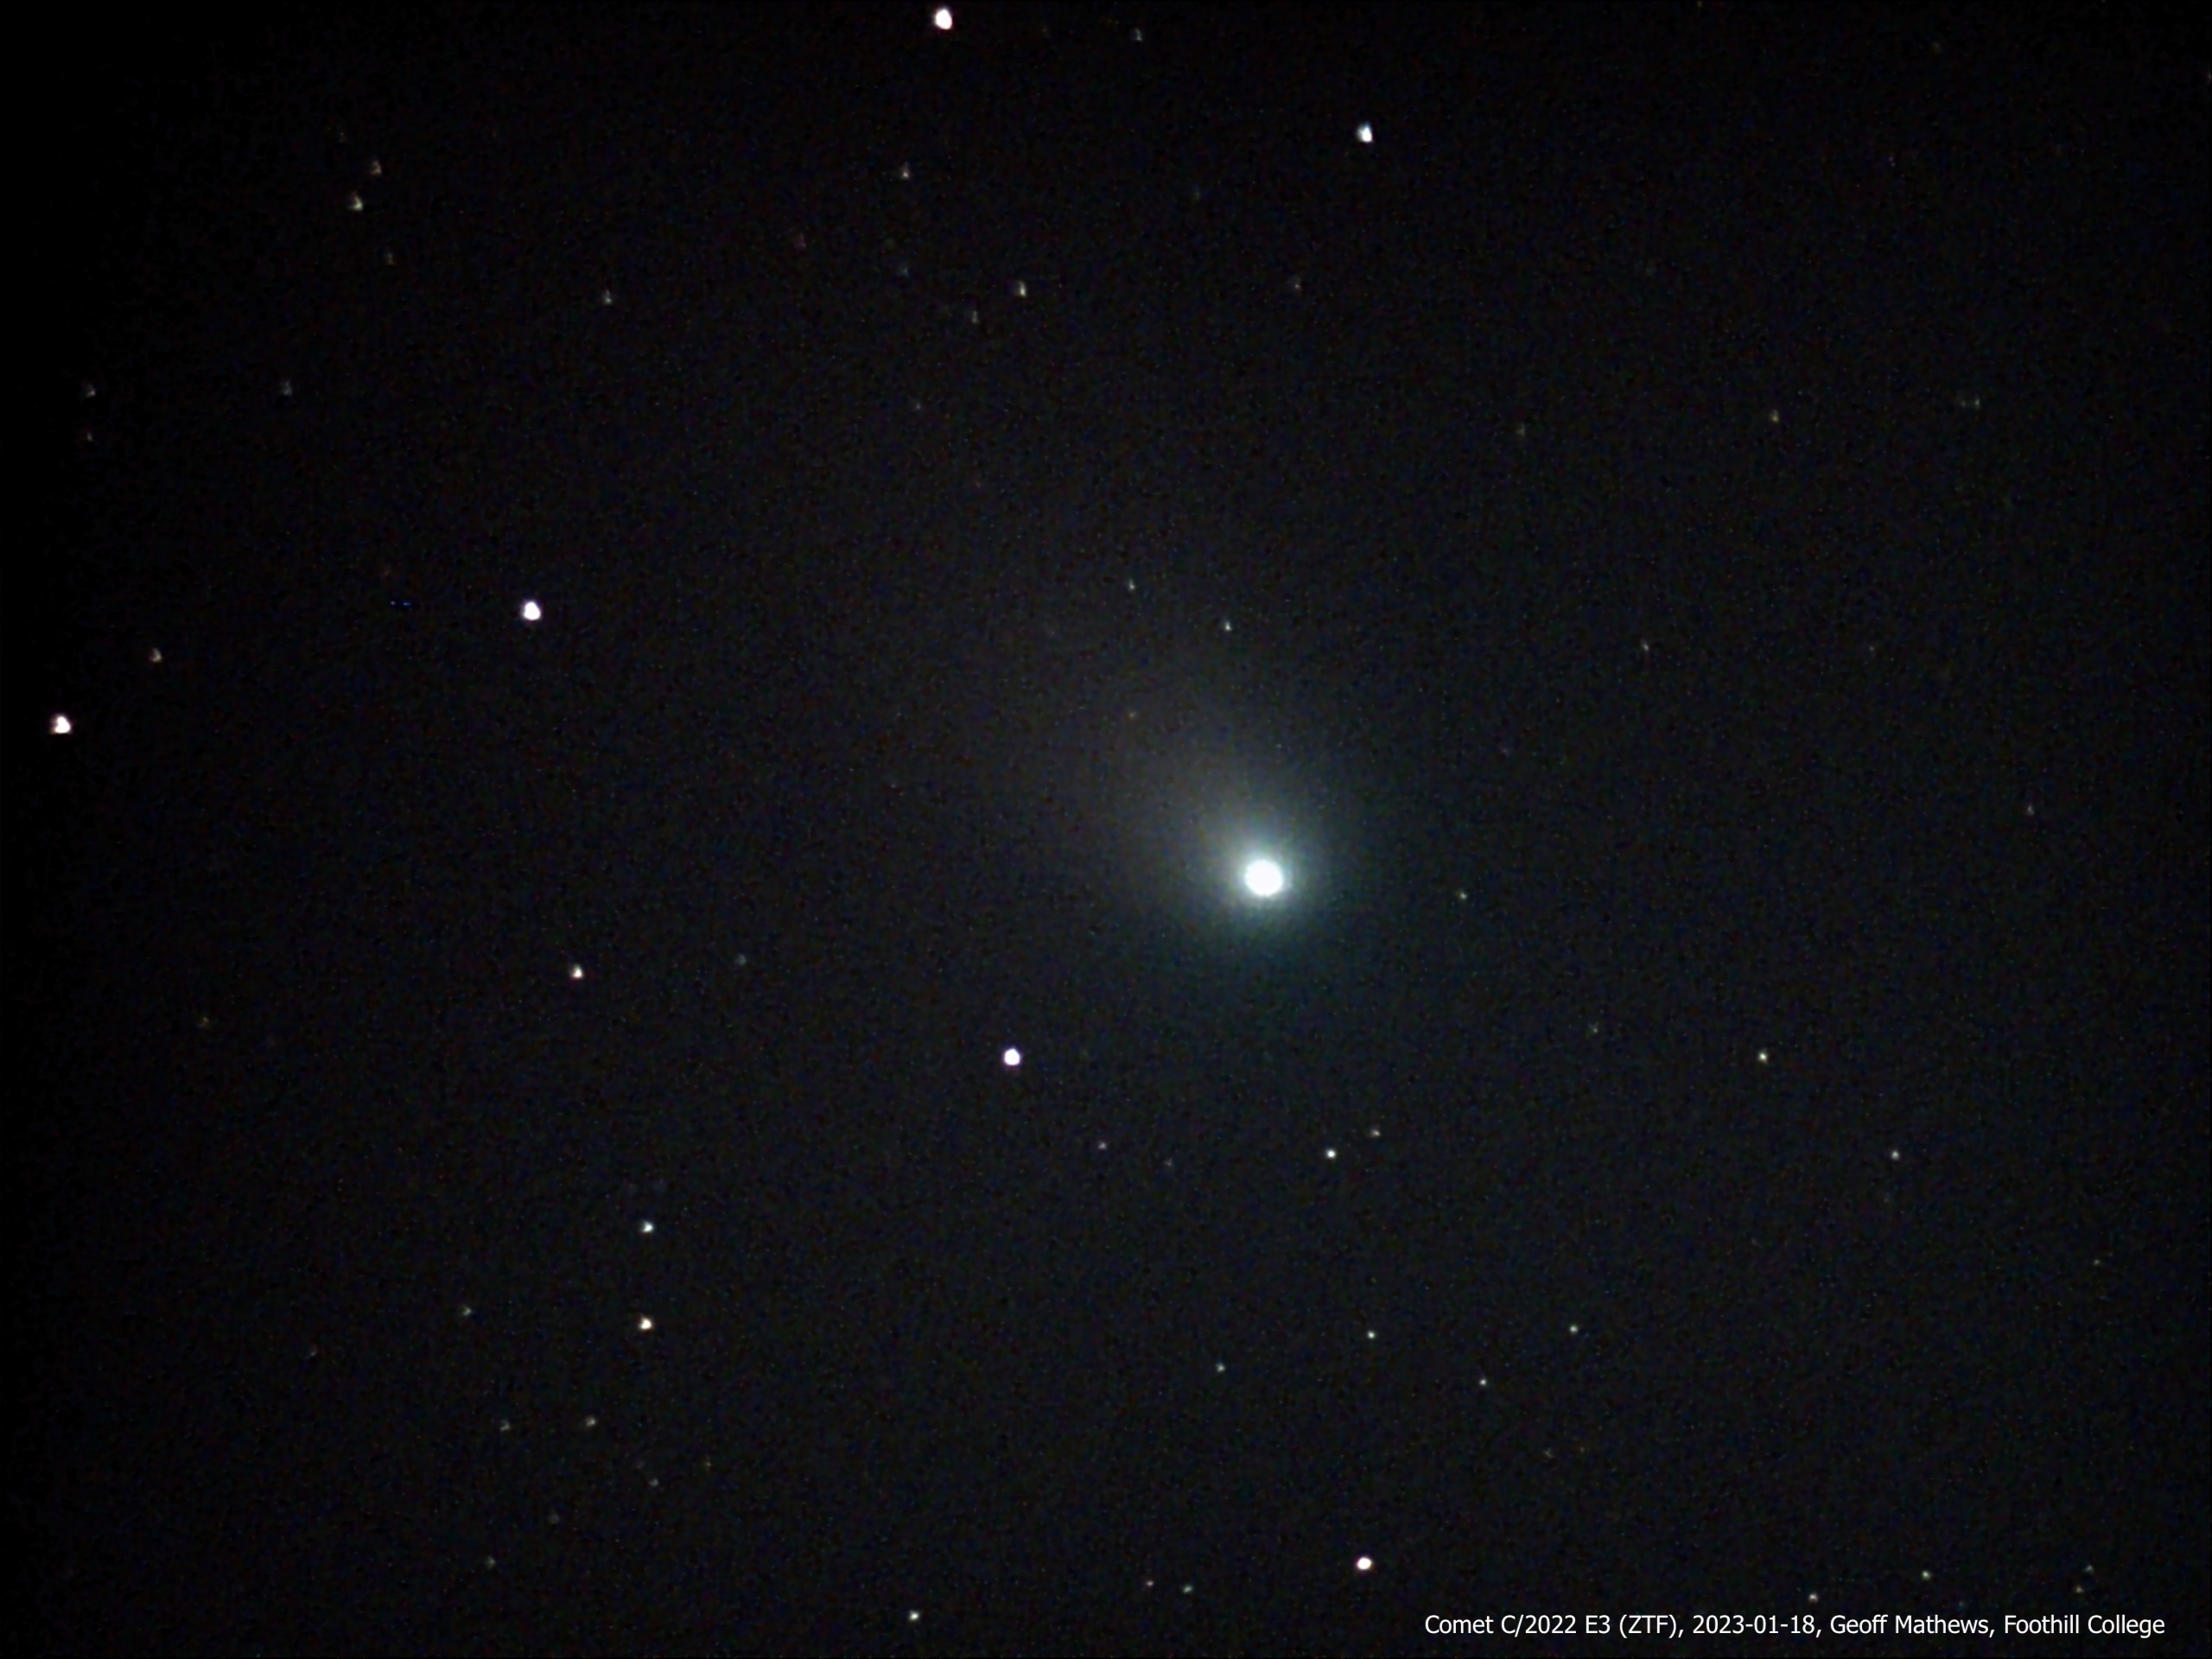 Comet C/2022 E3 (ZTF), as seen on the morning of January 18, 2023